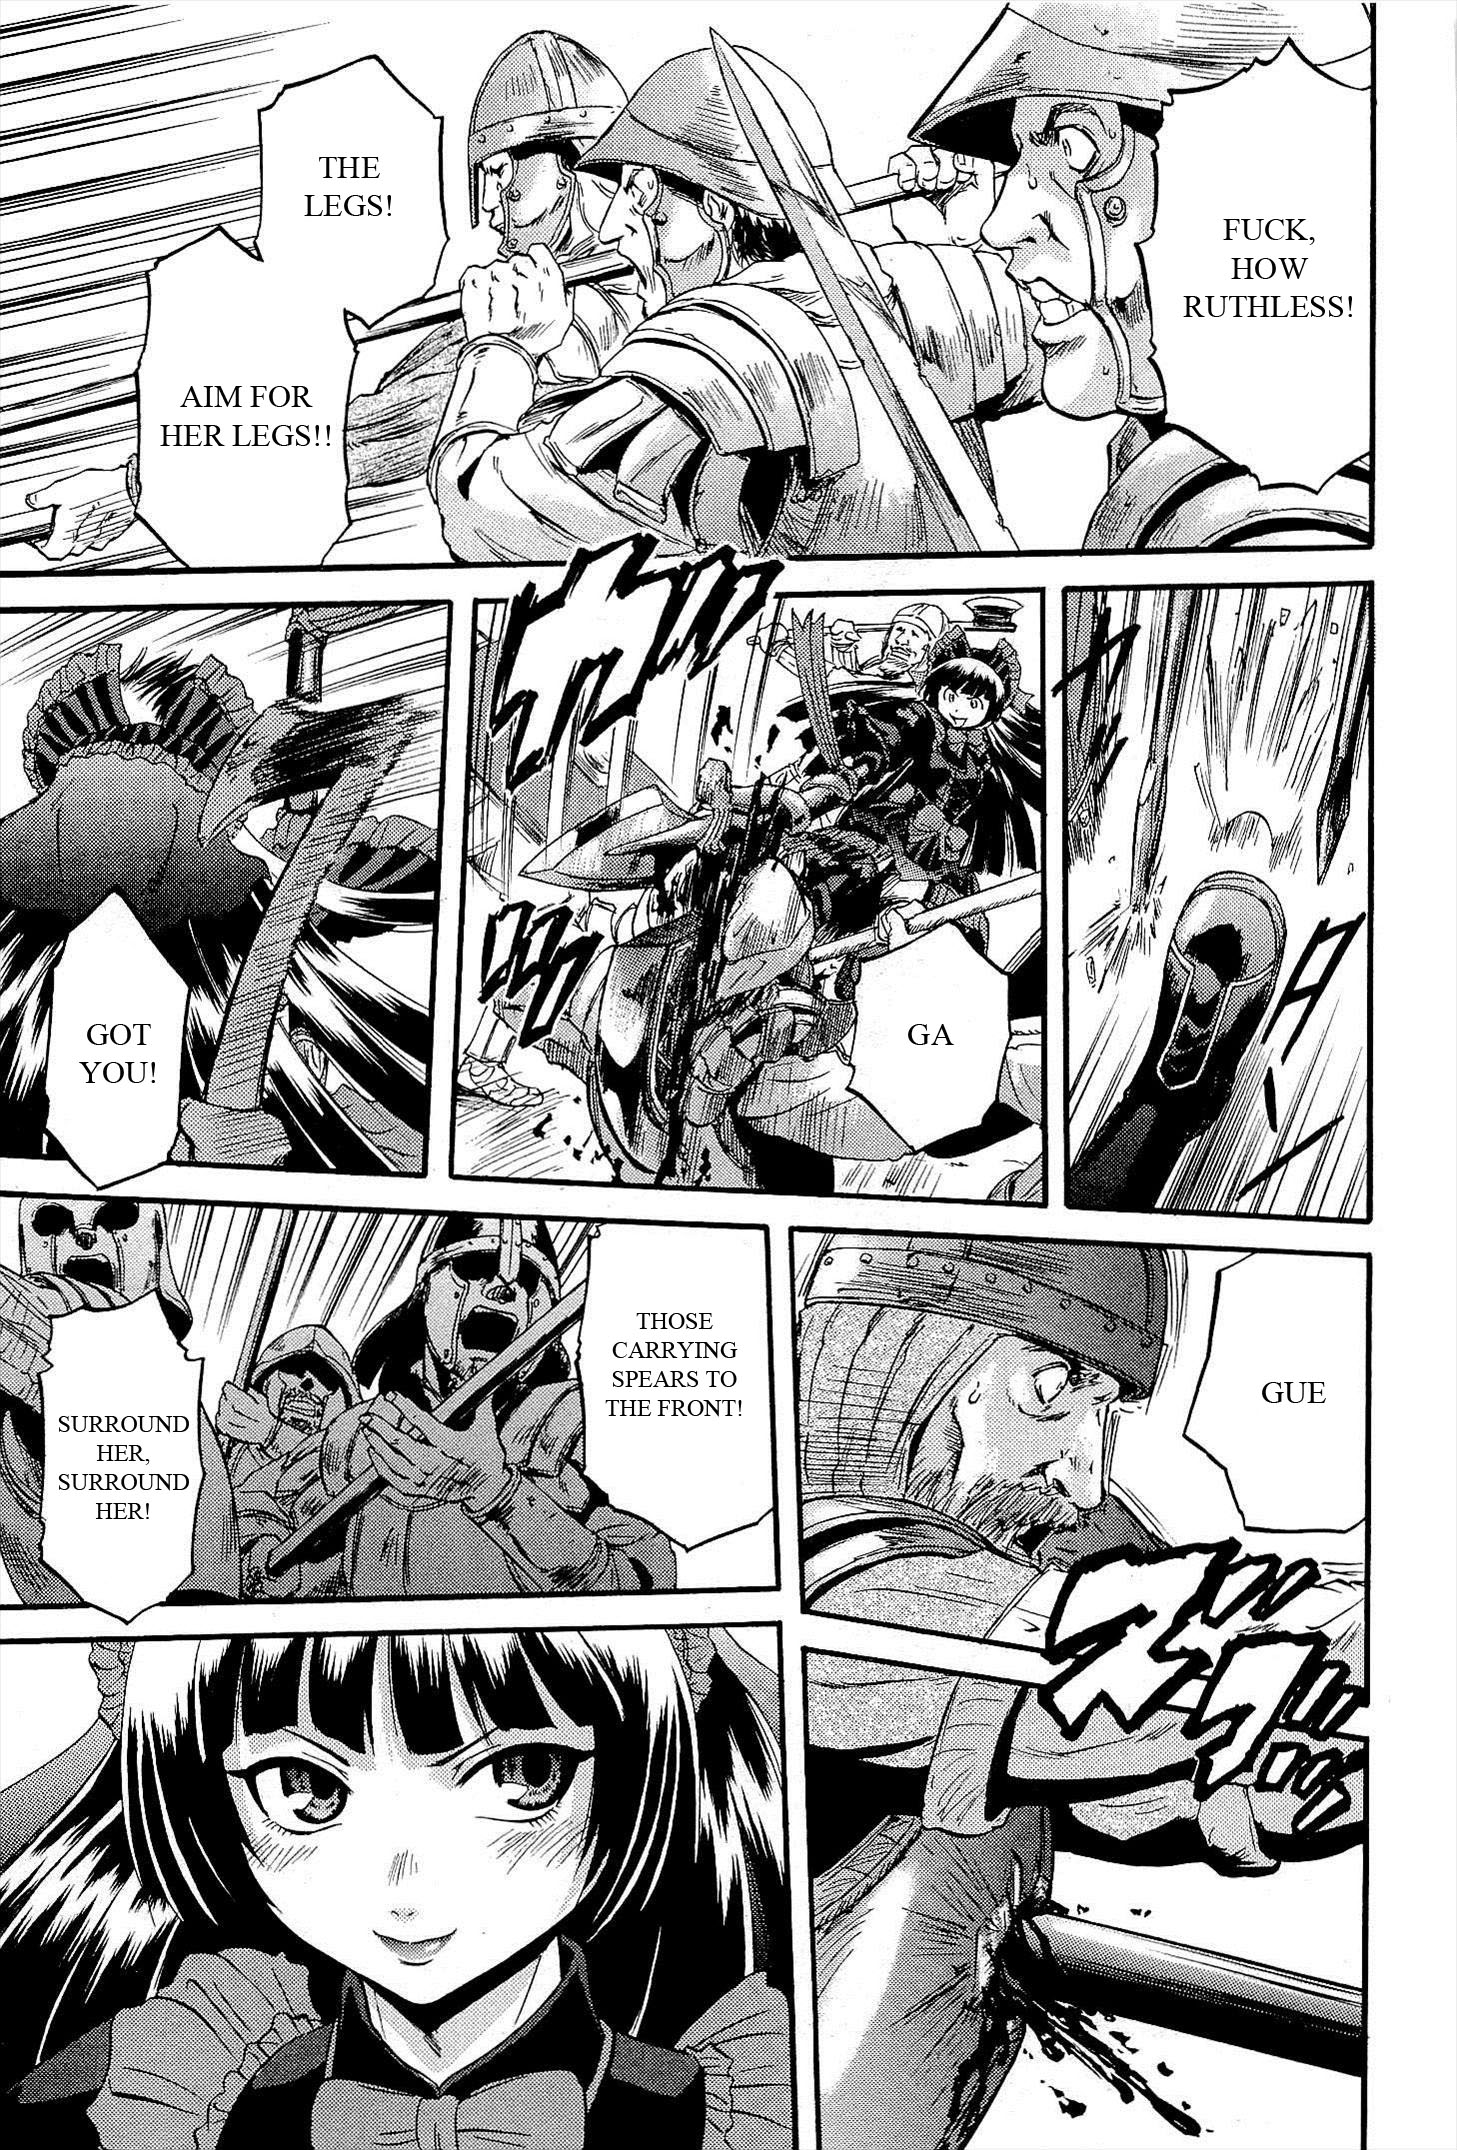 Gate - Thus the JSDF Fought There! Vol.2 Ch.12